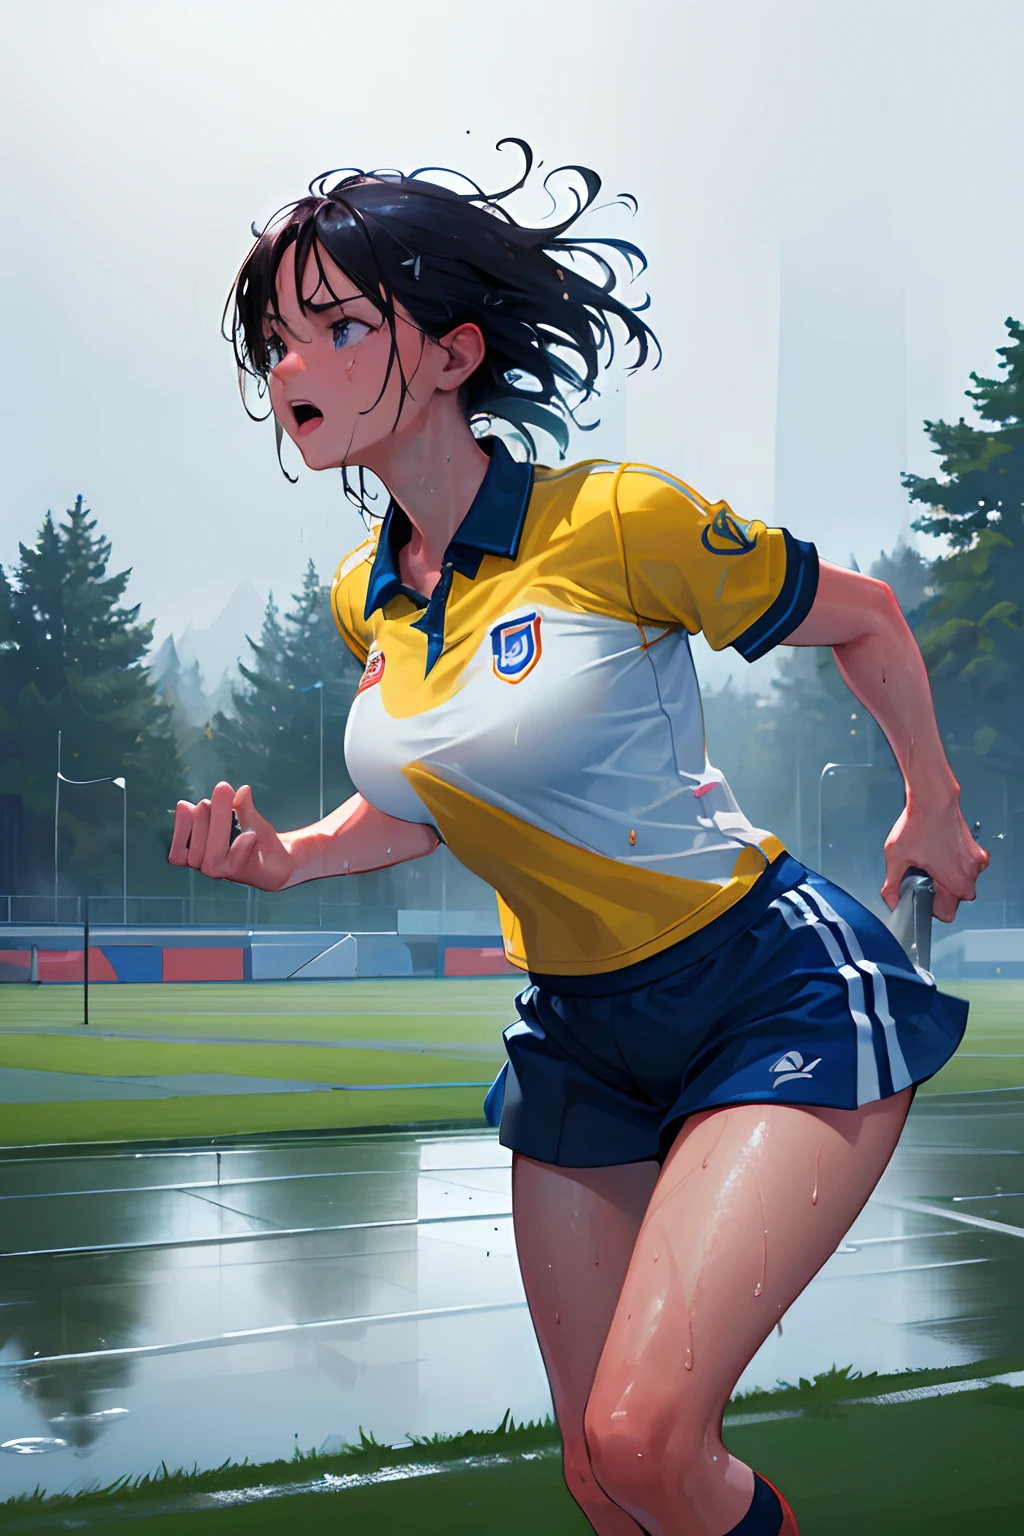 (best quality, highres:1.2, ultra-detailed, realistic:1.37), vibrant colors, dynamic lighting, rainy day, 2 girls, field hockey, wet hair, intense concentration, splashing water, action shots, grass stains, muddy ground, wet turf, determination, fast-paced game, athletic physique, shiny hockey sticks, wet uniforms, raindrops, blurred movement, focus on the ball, intense competition, skillful dribbling, energetic play, teamwork, powerful shots, wet pitch, passionate sports, fierce determination, wet atmosphere, flowing movements, emotional expressions, challenging conditions, dramatic lighting, women's sport, dedicated athletes, exciting game, perseverance, adrenaline rush, speed and agility, spirited play, wet splashes